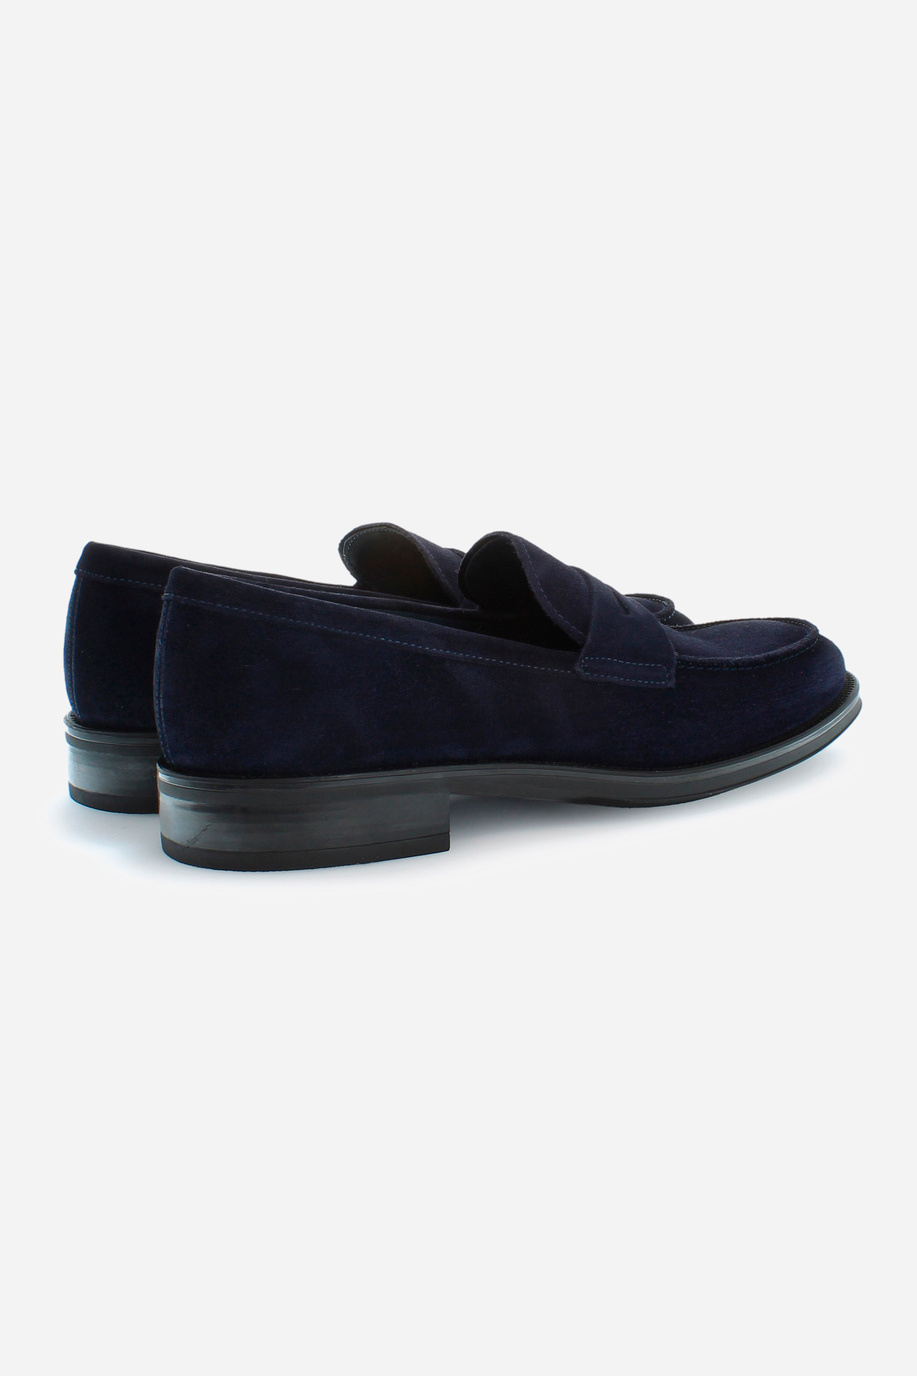 Men's college loafers in leather - Man shoes | La Martina - Official Online Shop